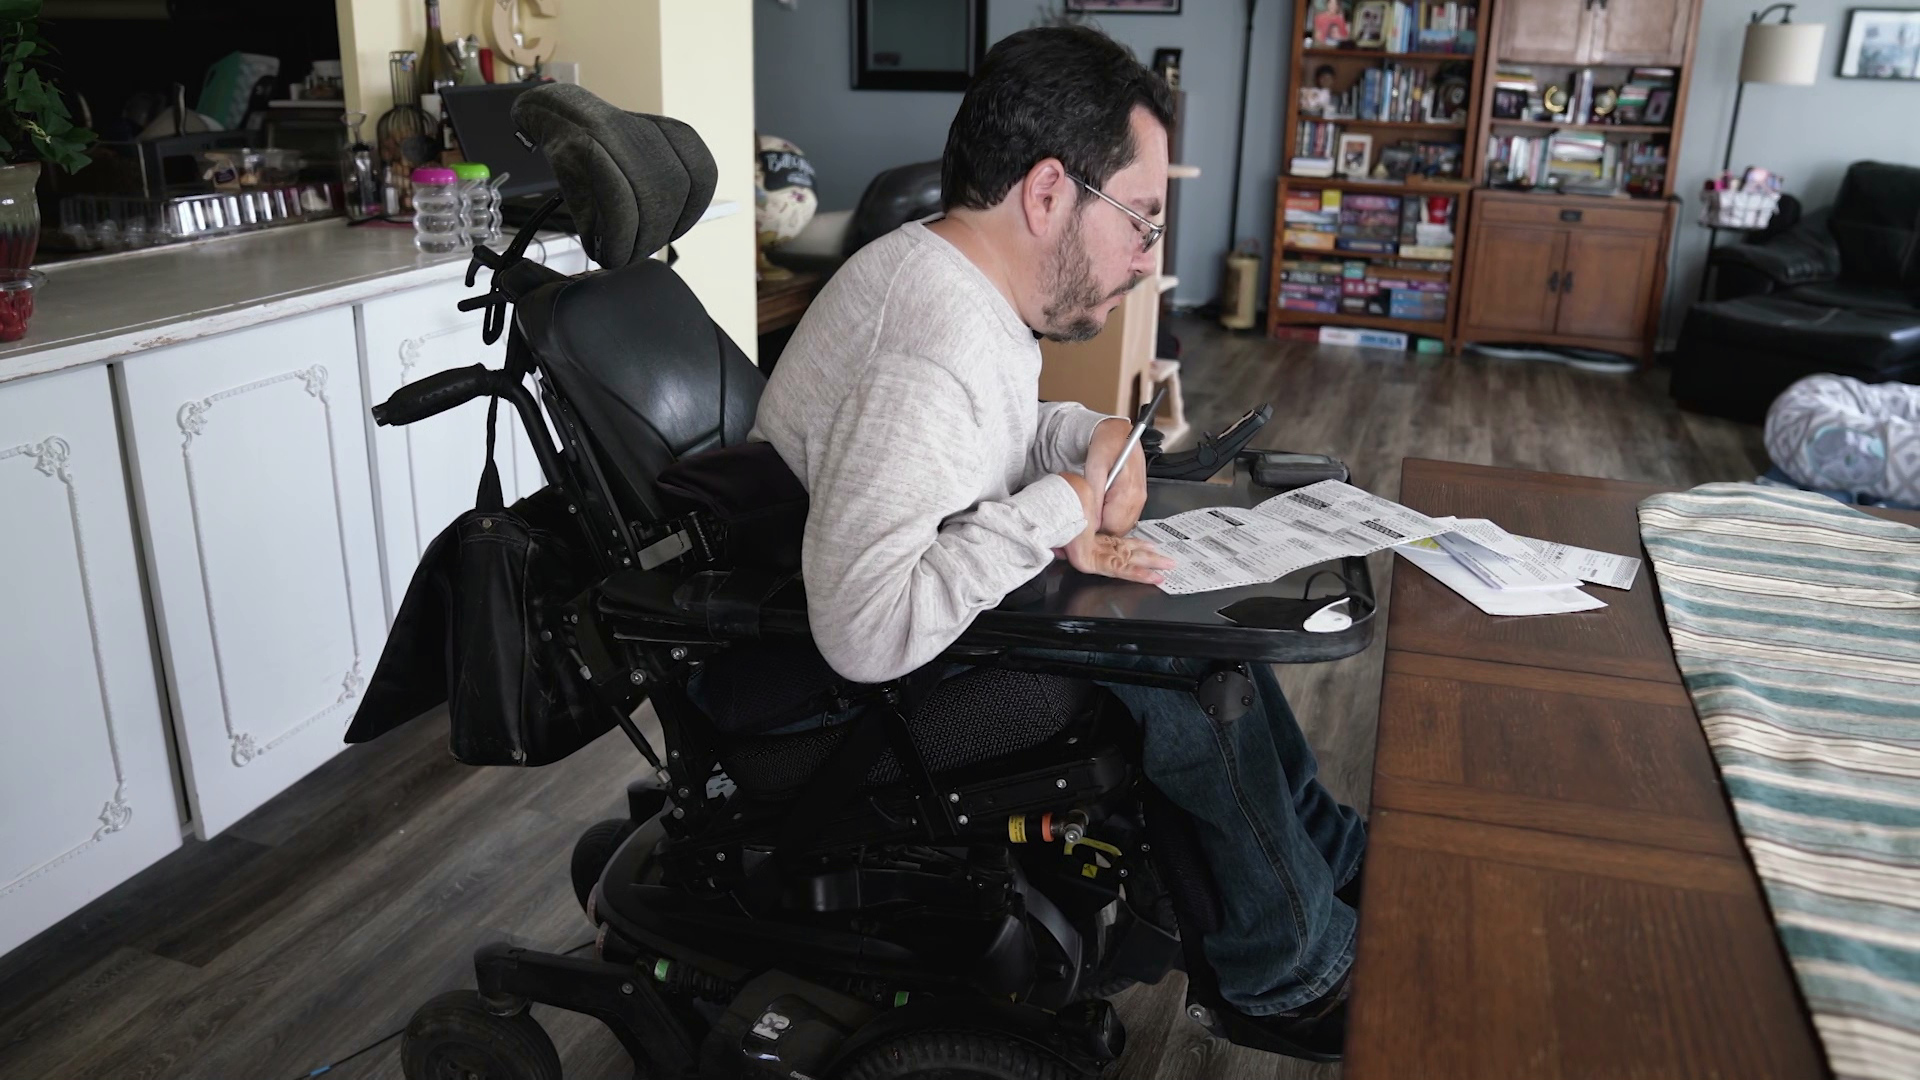 William Crowley fills out a ballot placed on the tray of his wheelchair inside an apartment with kitchen cupboards and a dining table, a chair, bookshelves and other items in the background.